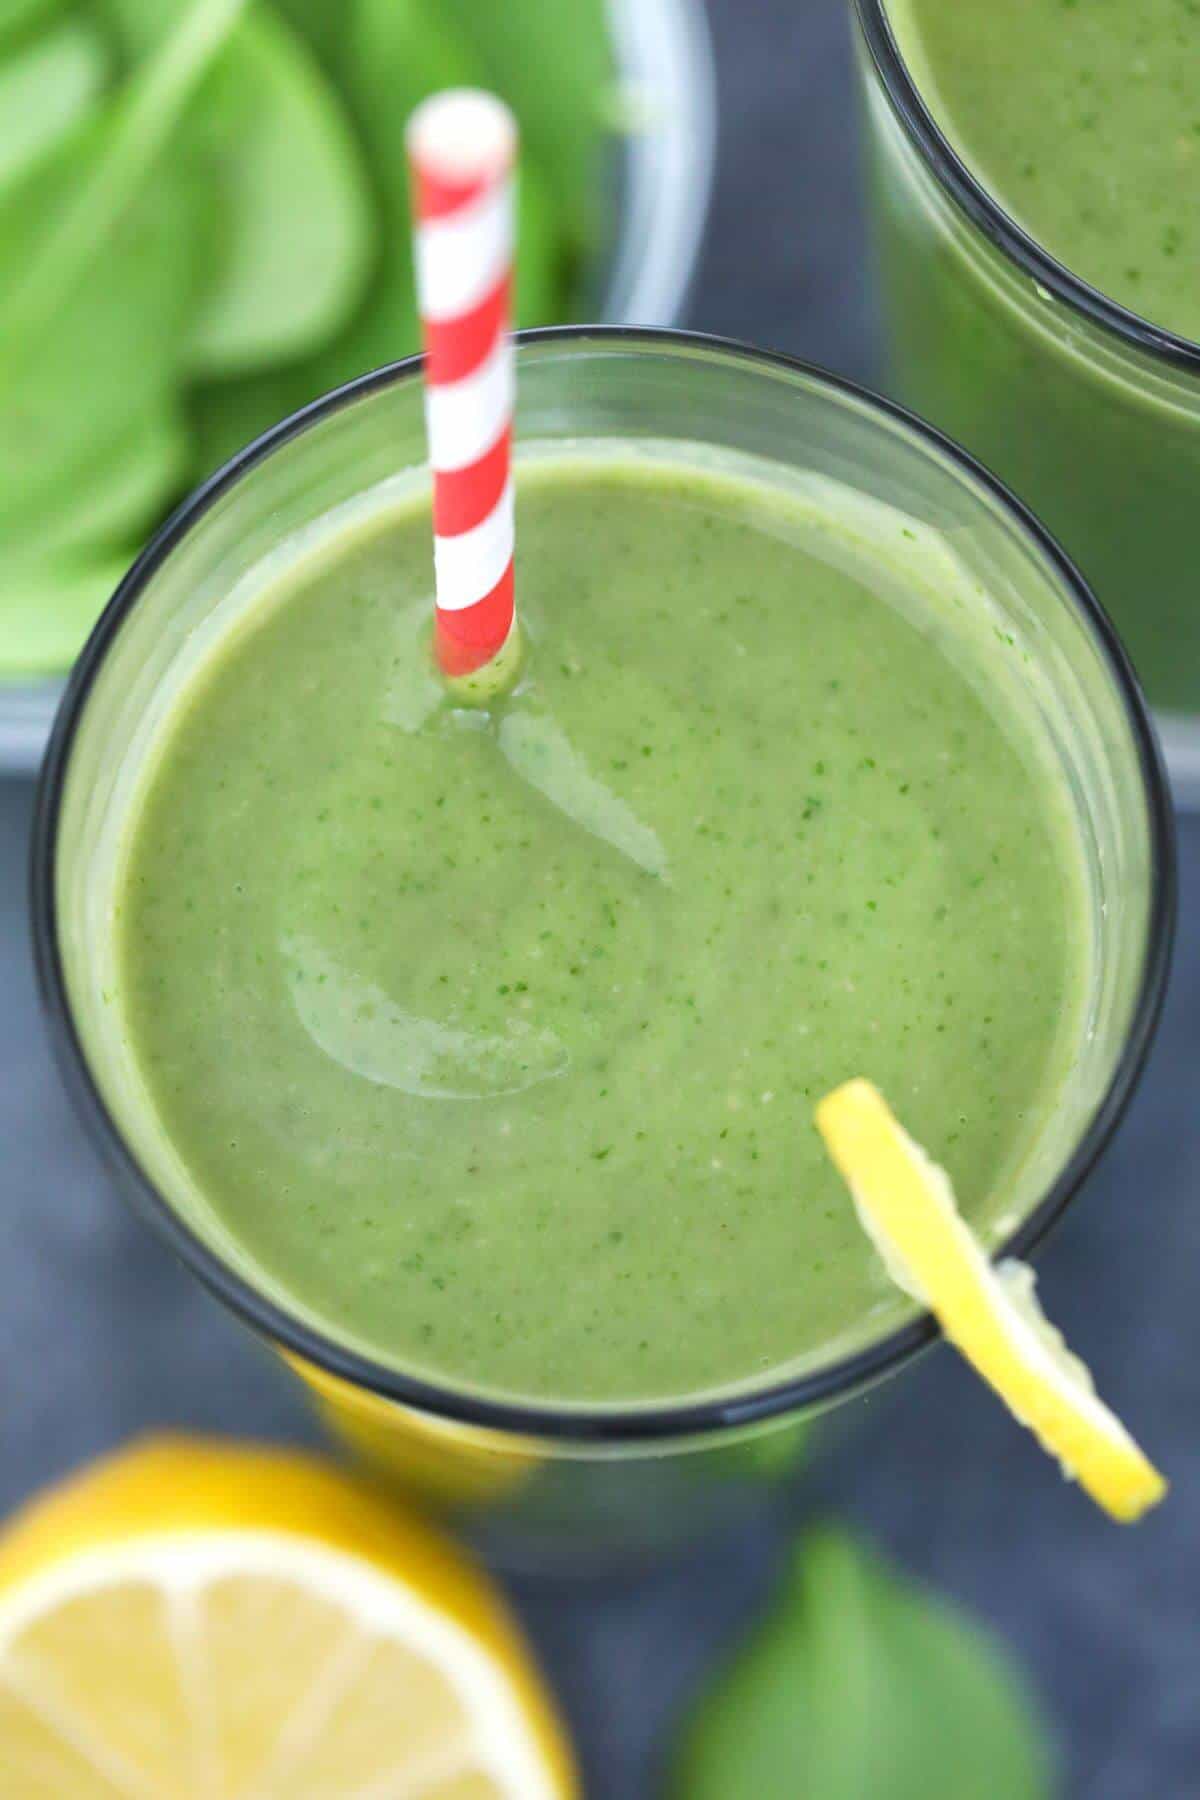 Overhead look into glass with avocado spinach smoothie.